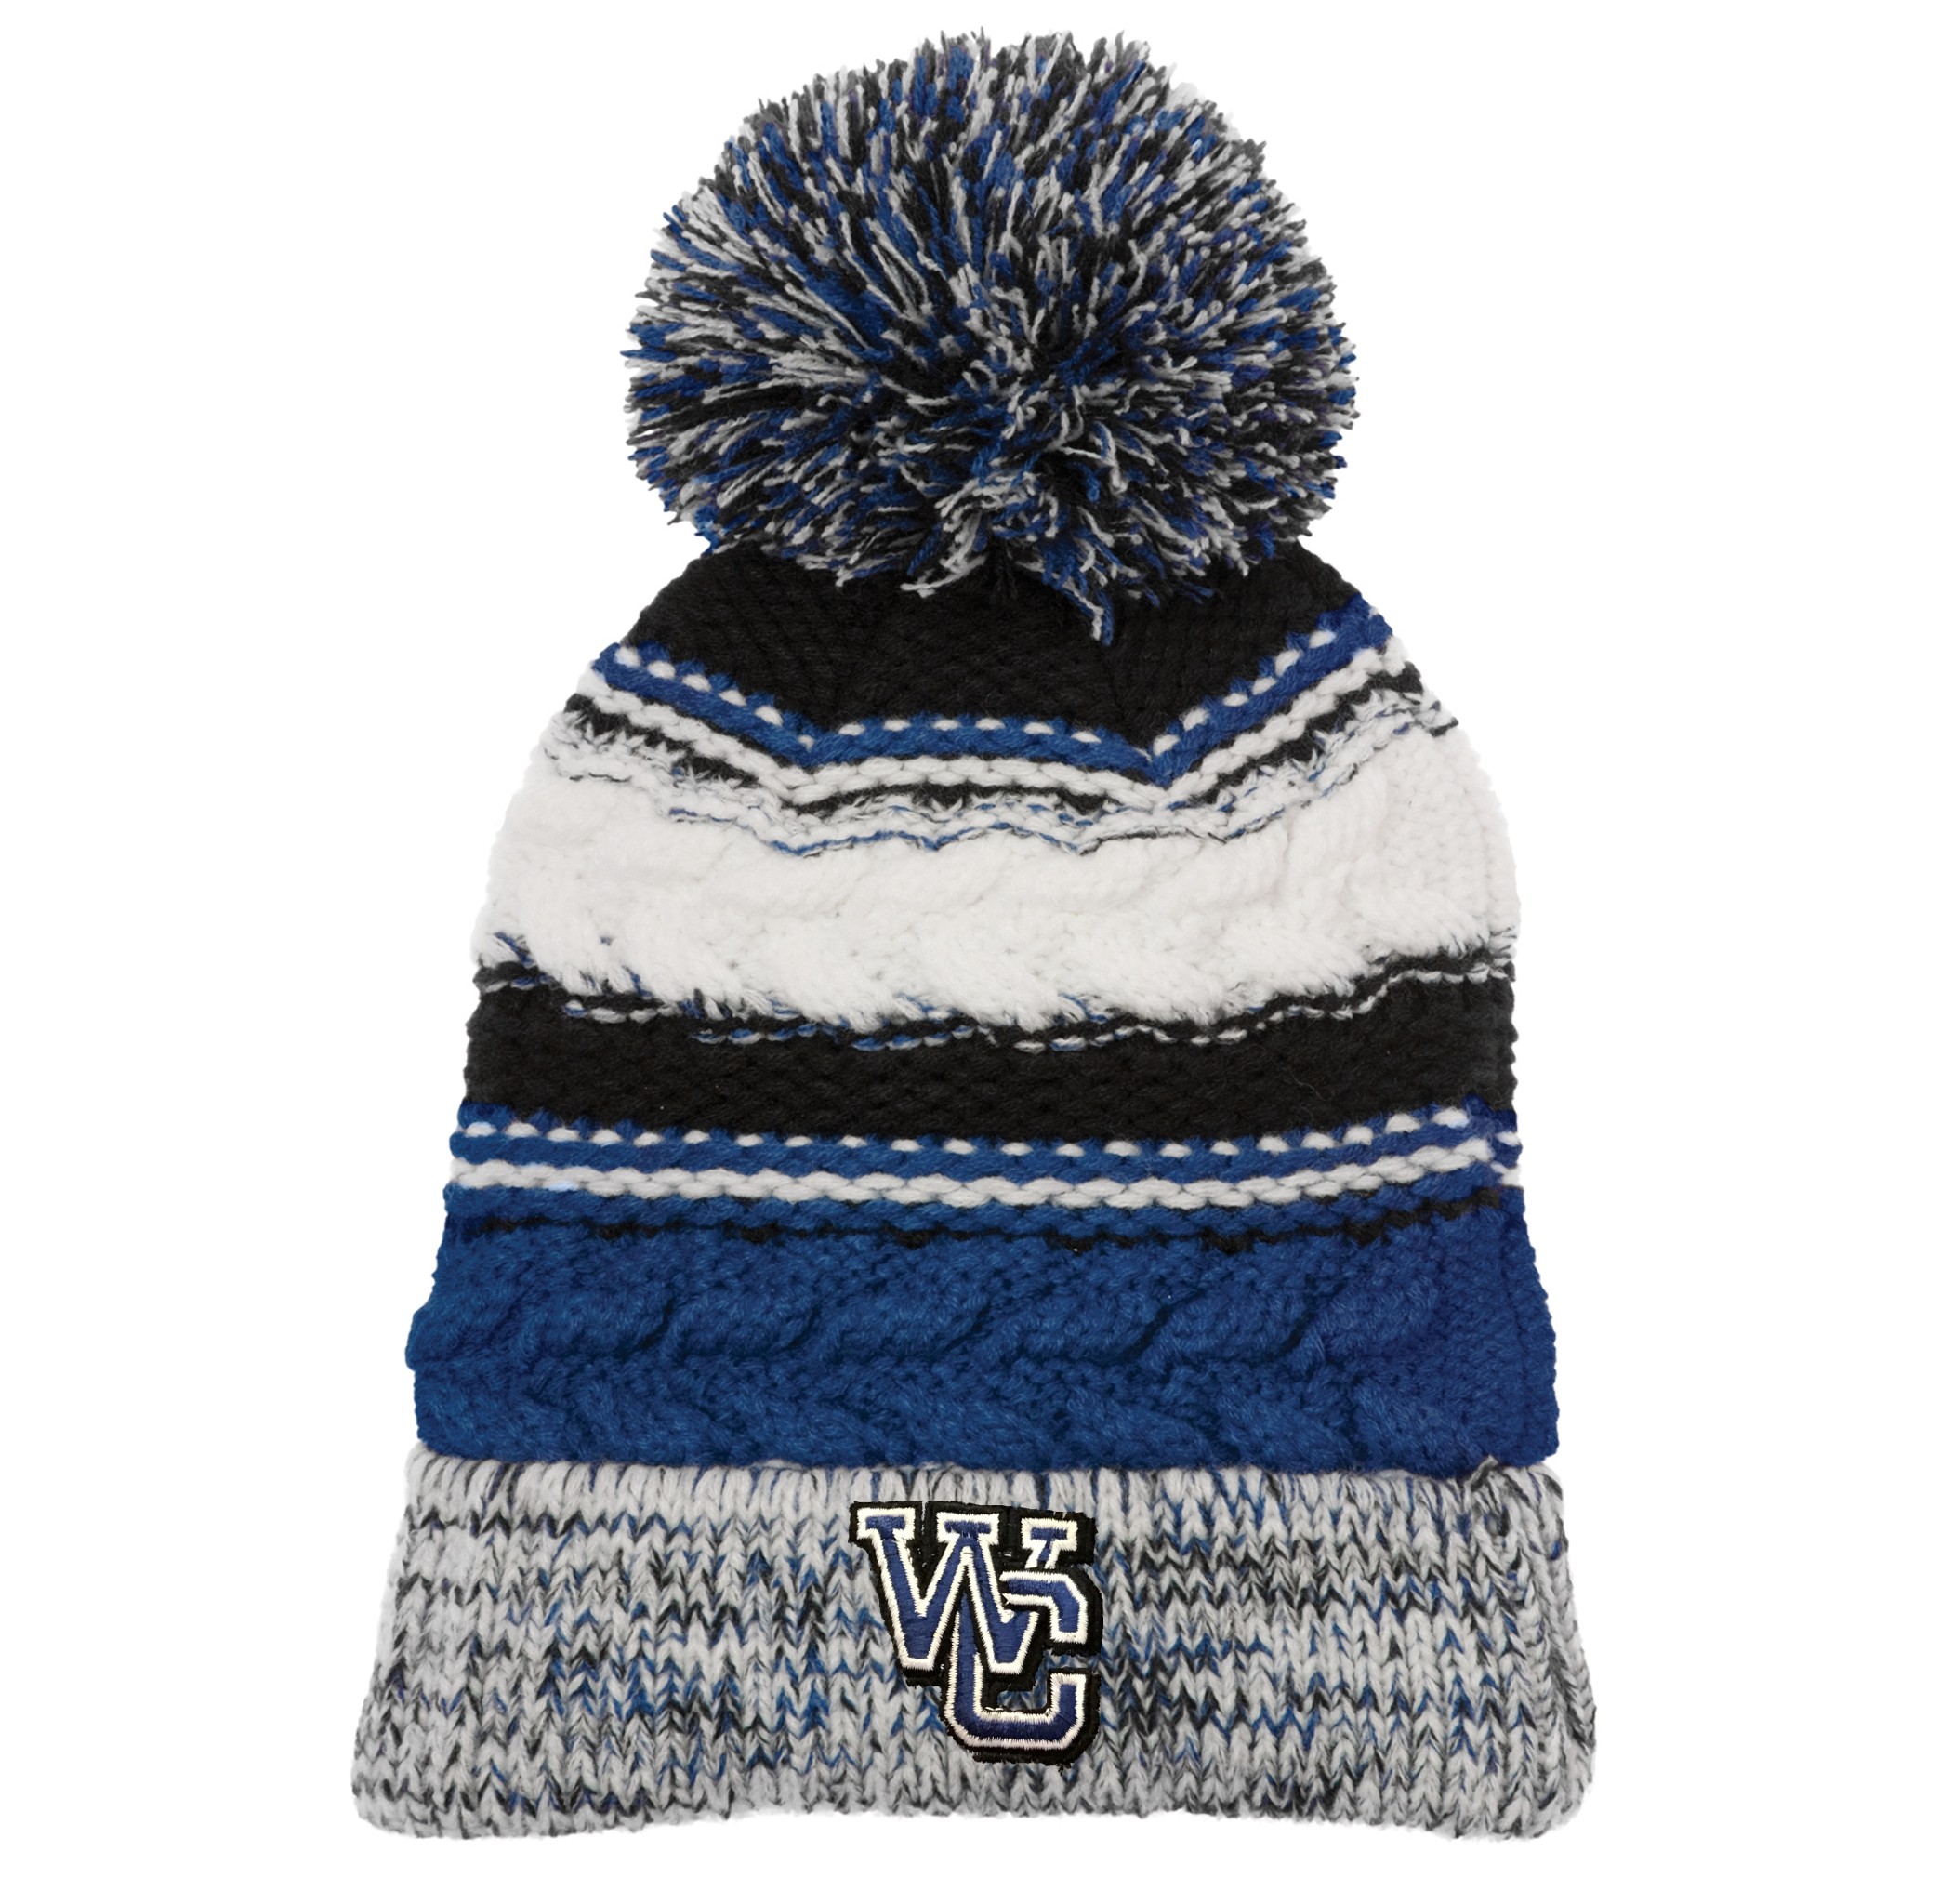 WC Knitted Hat - Royal